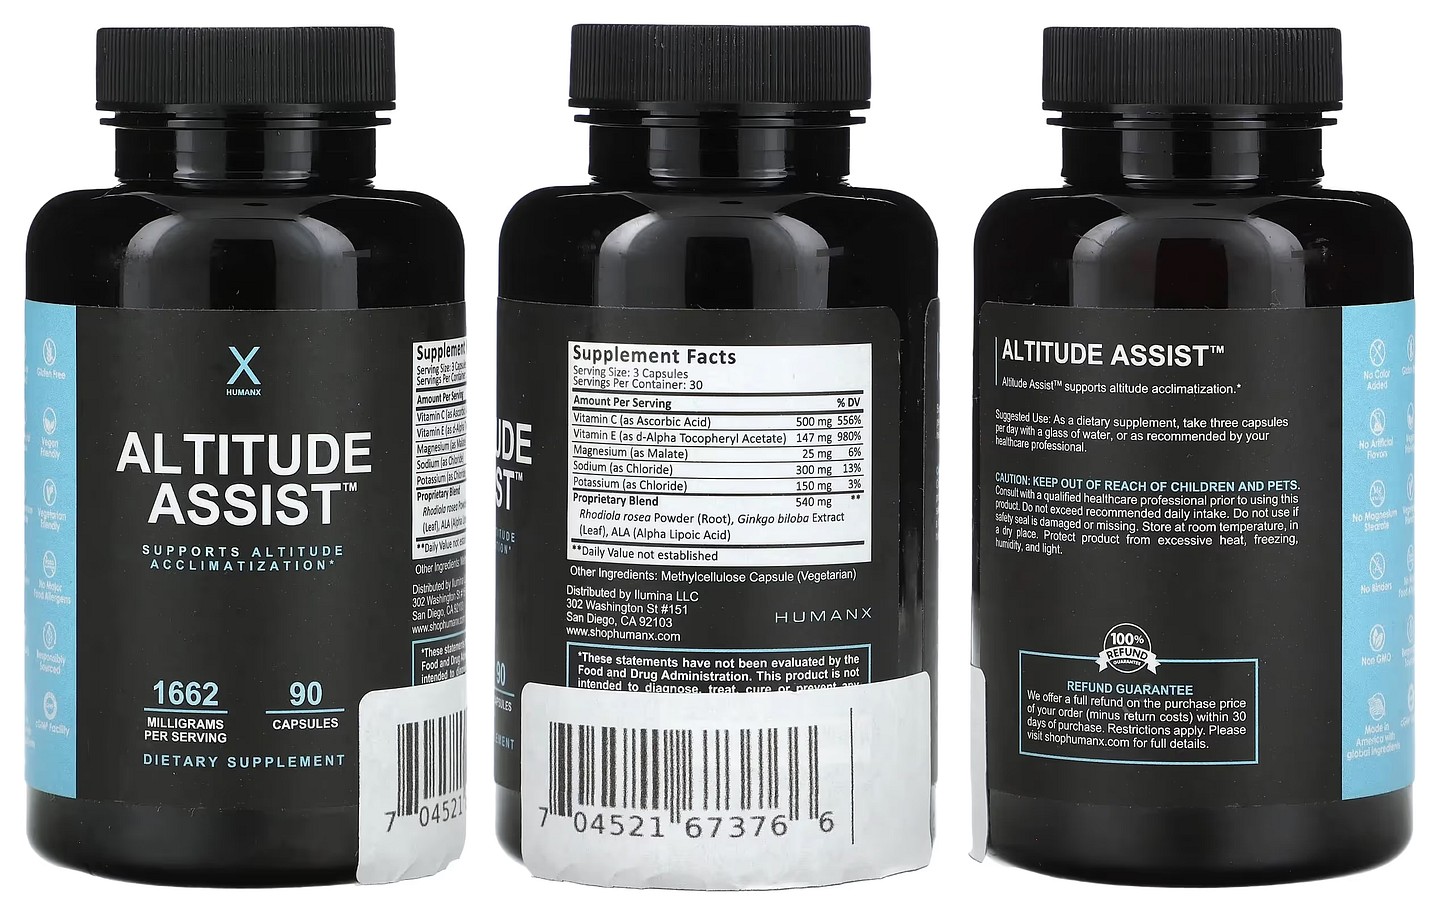 Humanx, Altitude Assist packaging